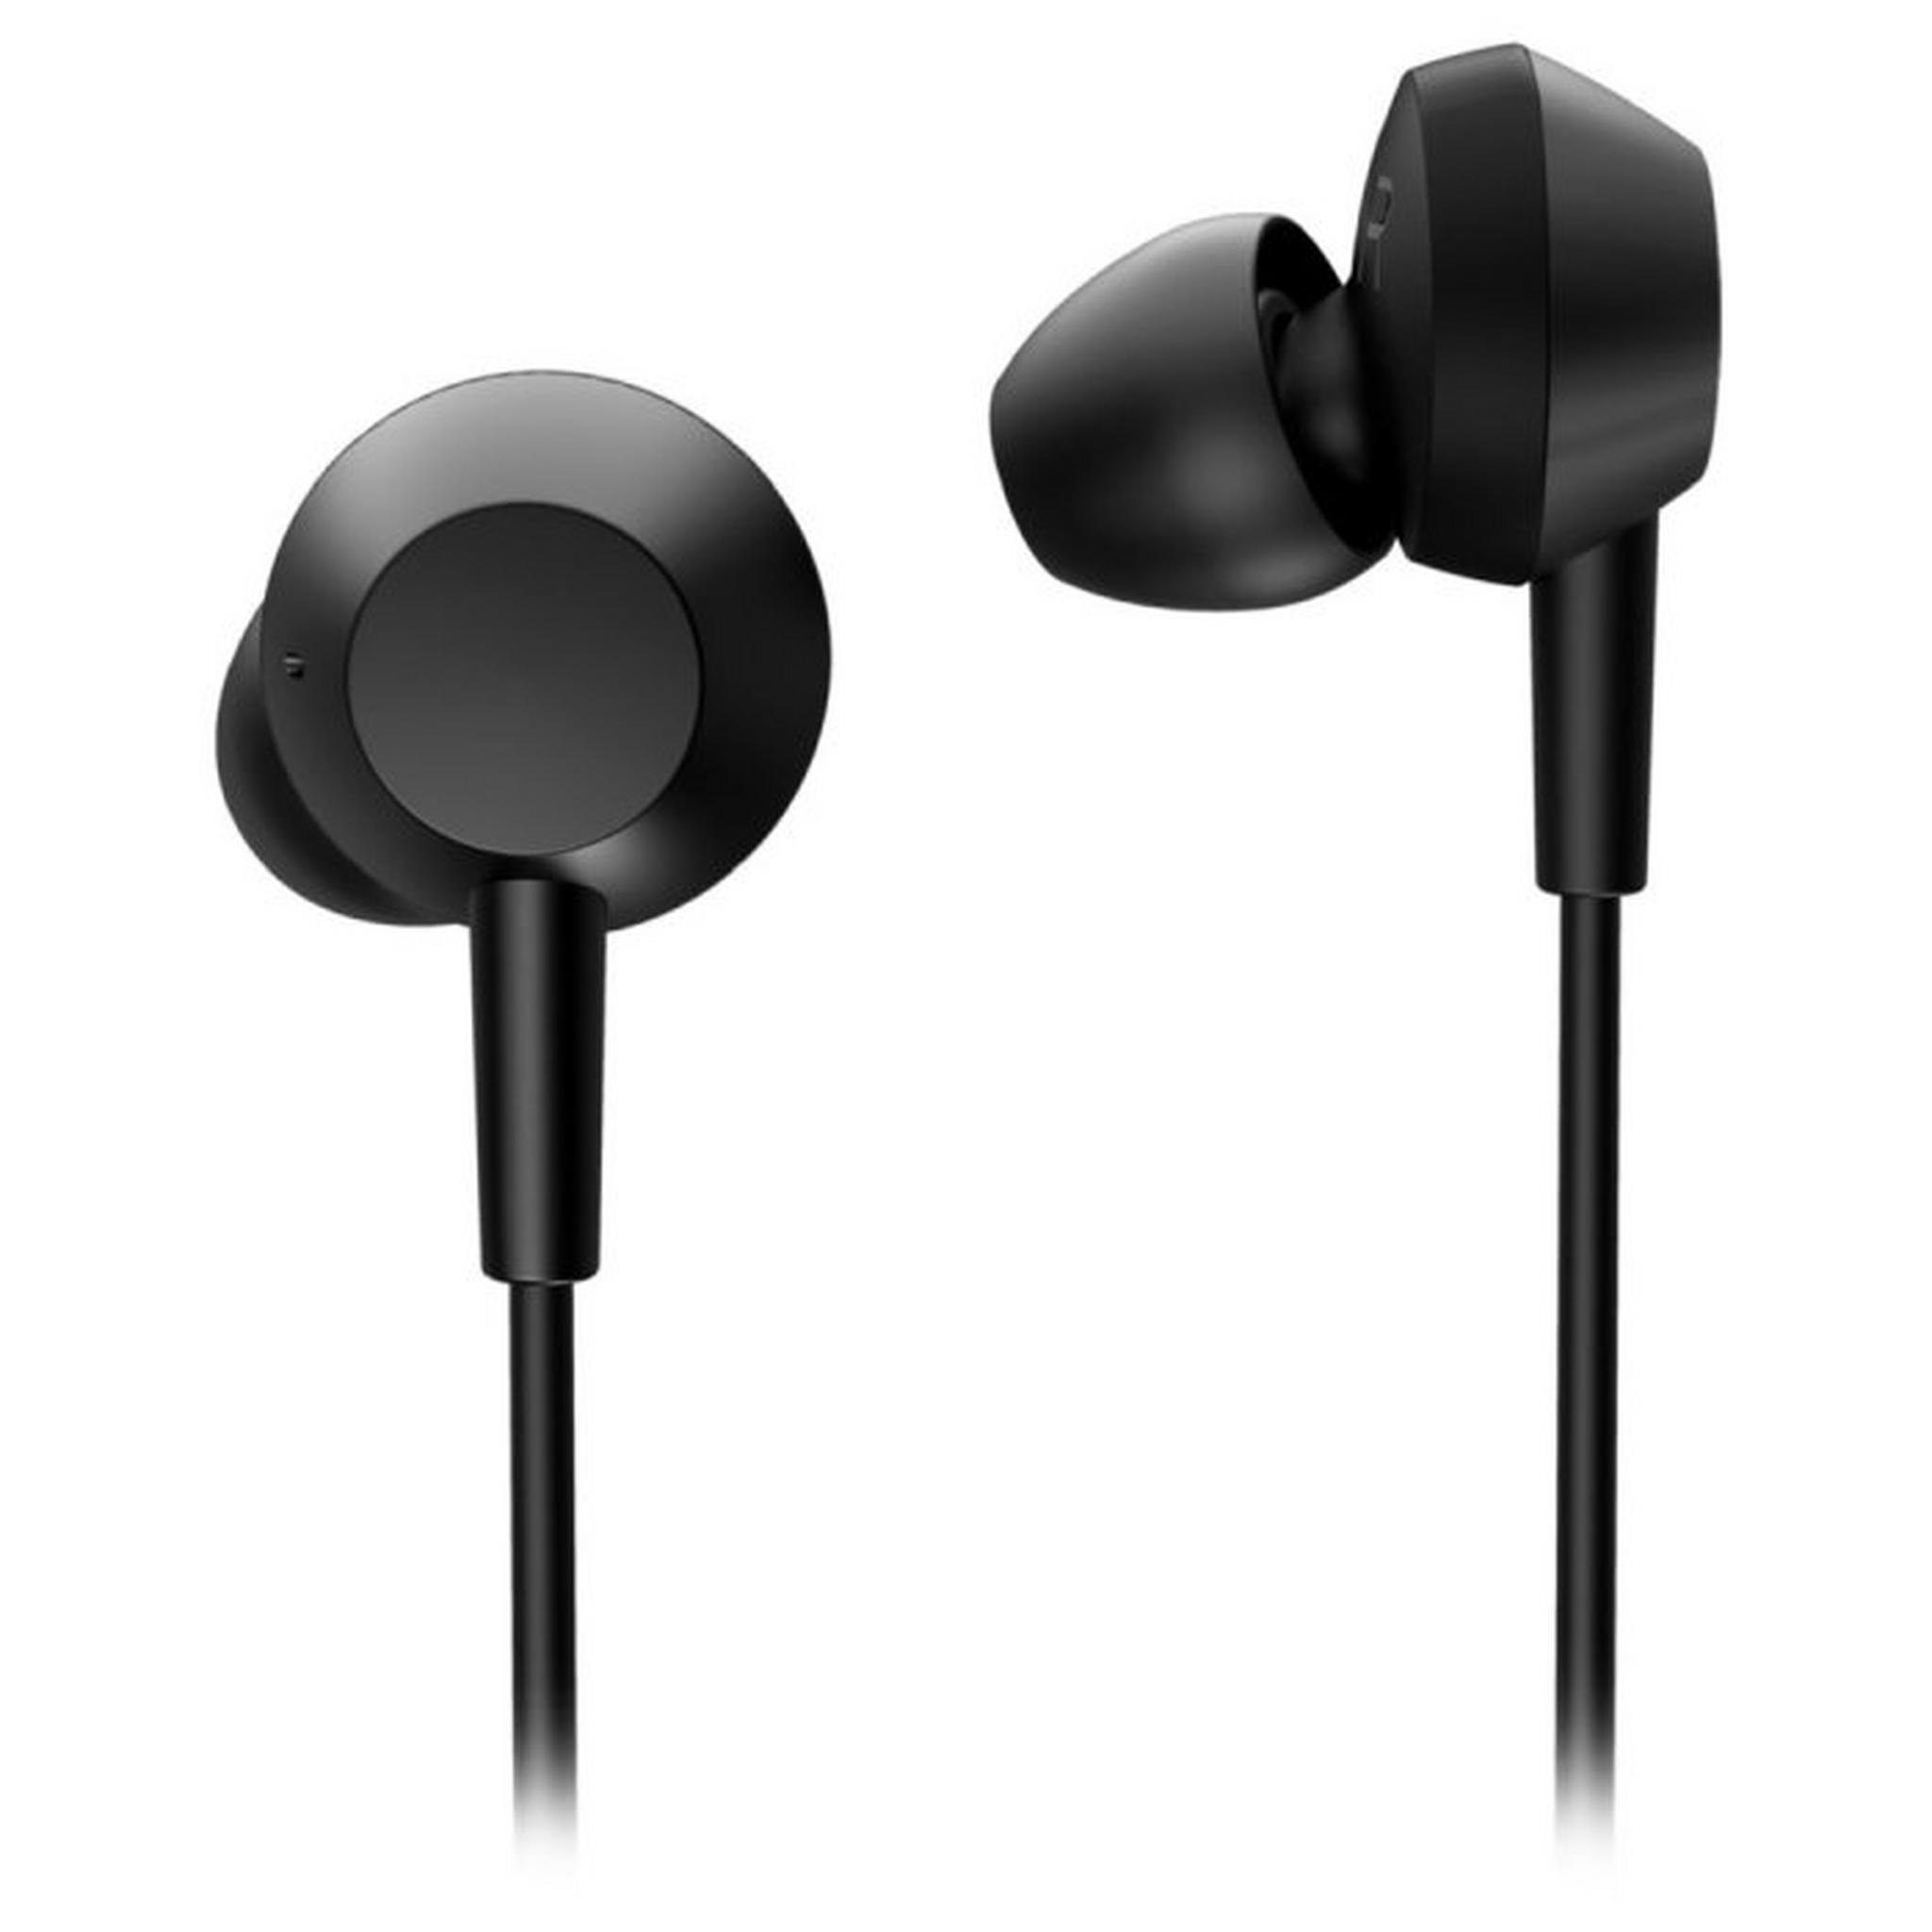 Philips Wired In-ear headphones with mic, TAE5008BK/00 – Black